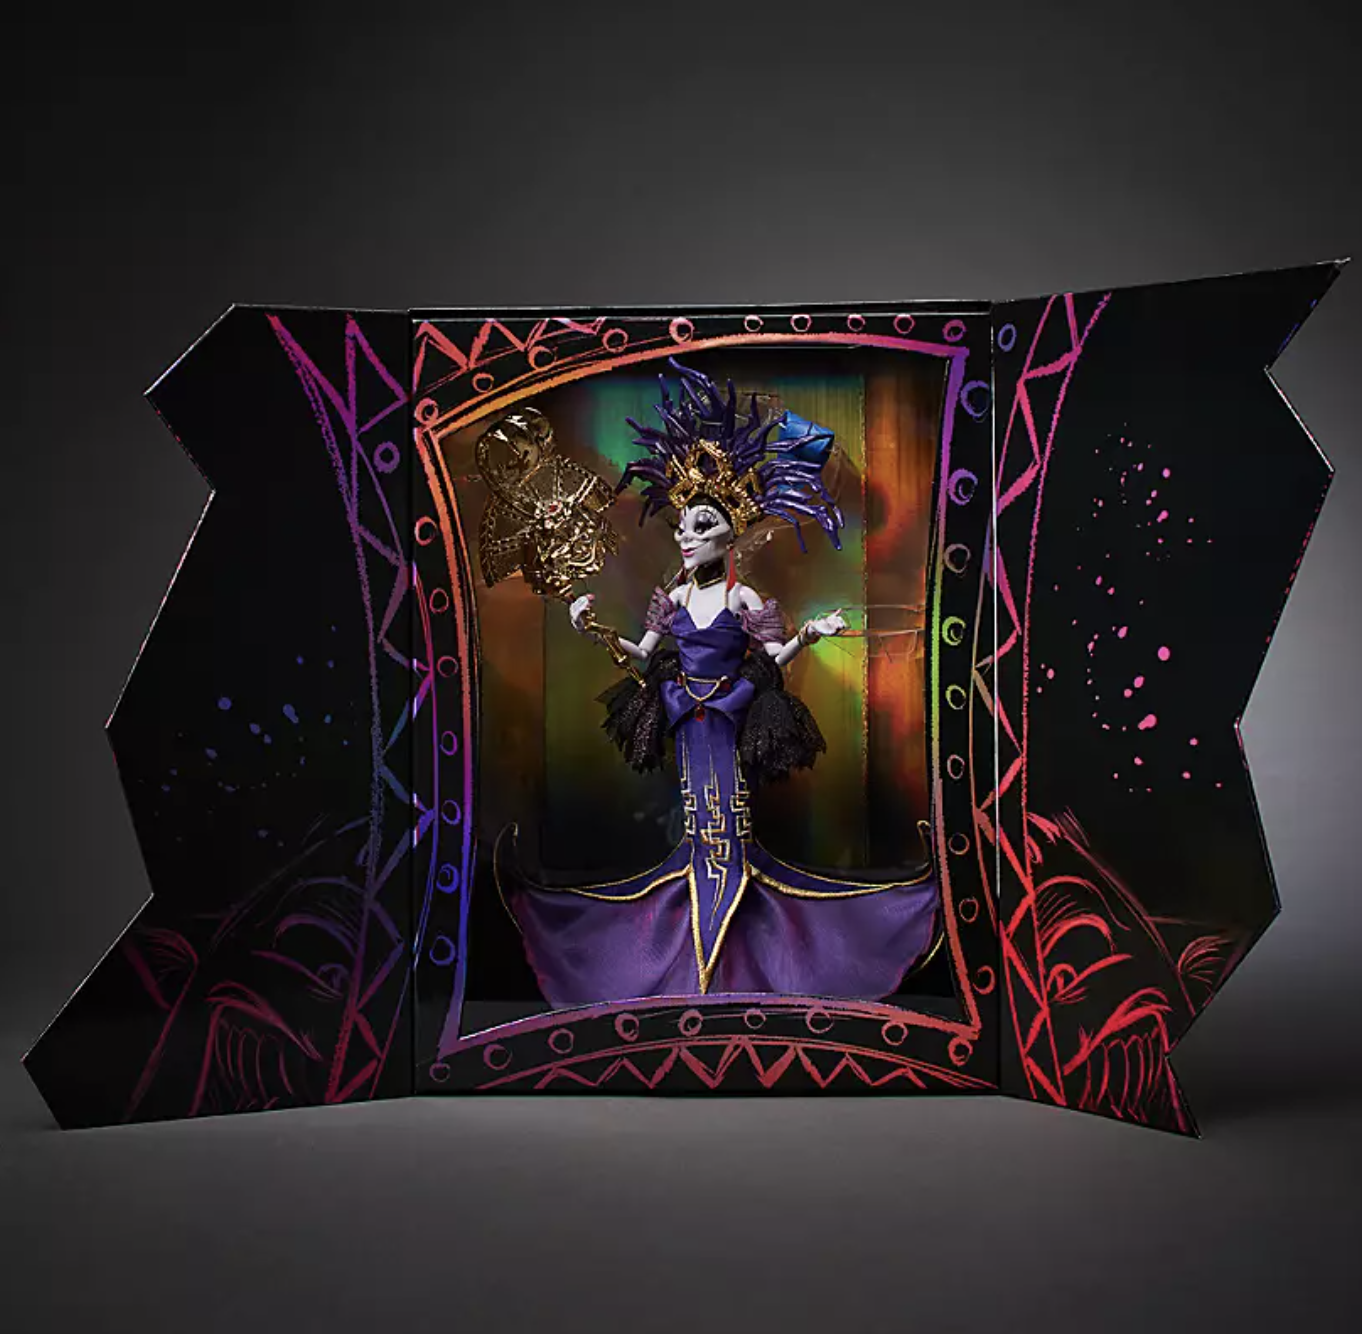 Already?! Disney's Villains Midnight Masquerade Yzma Doll Is SOLD OUT!